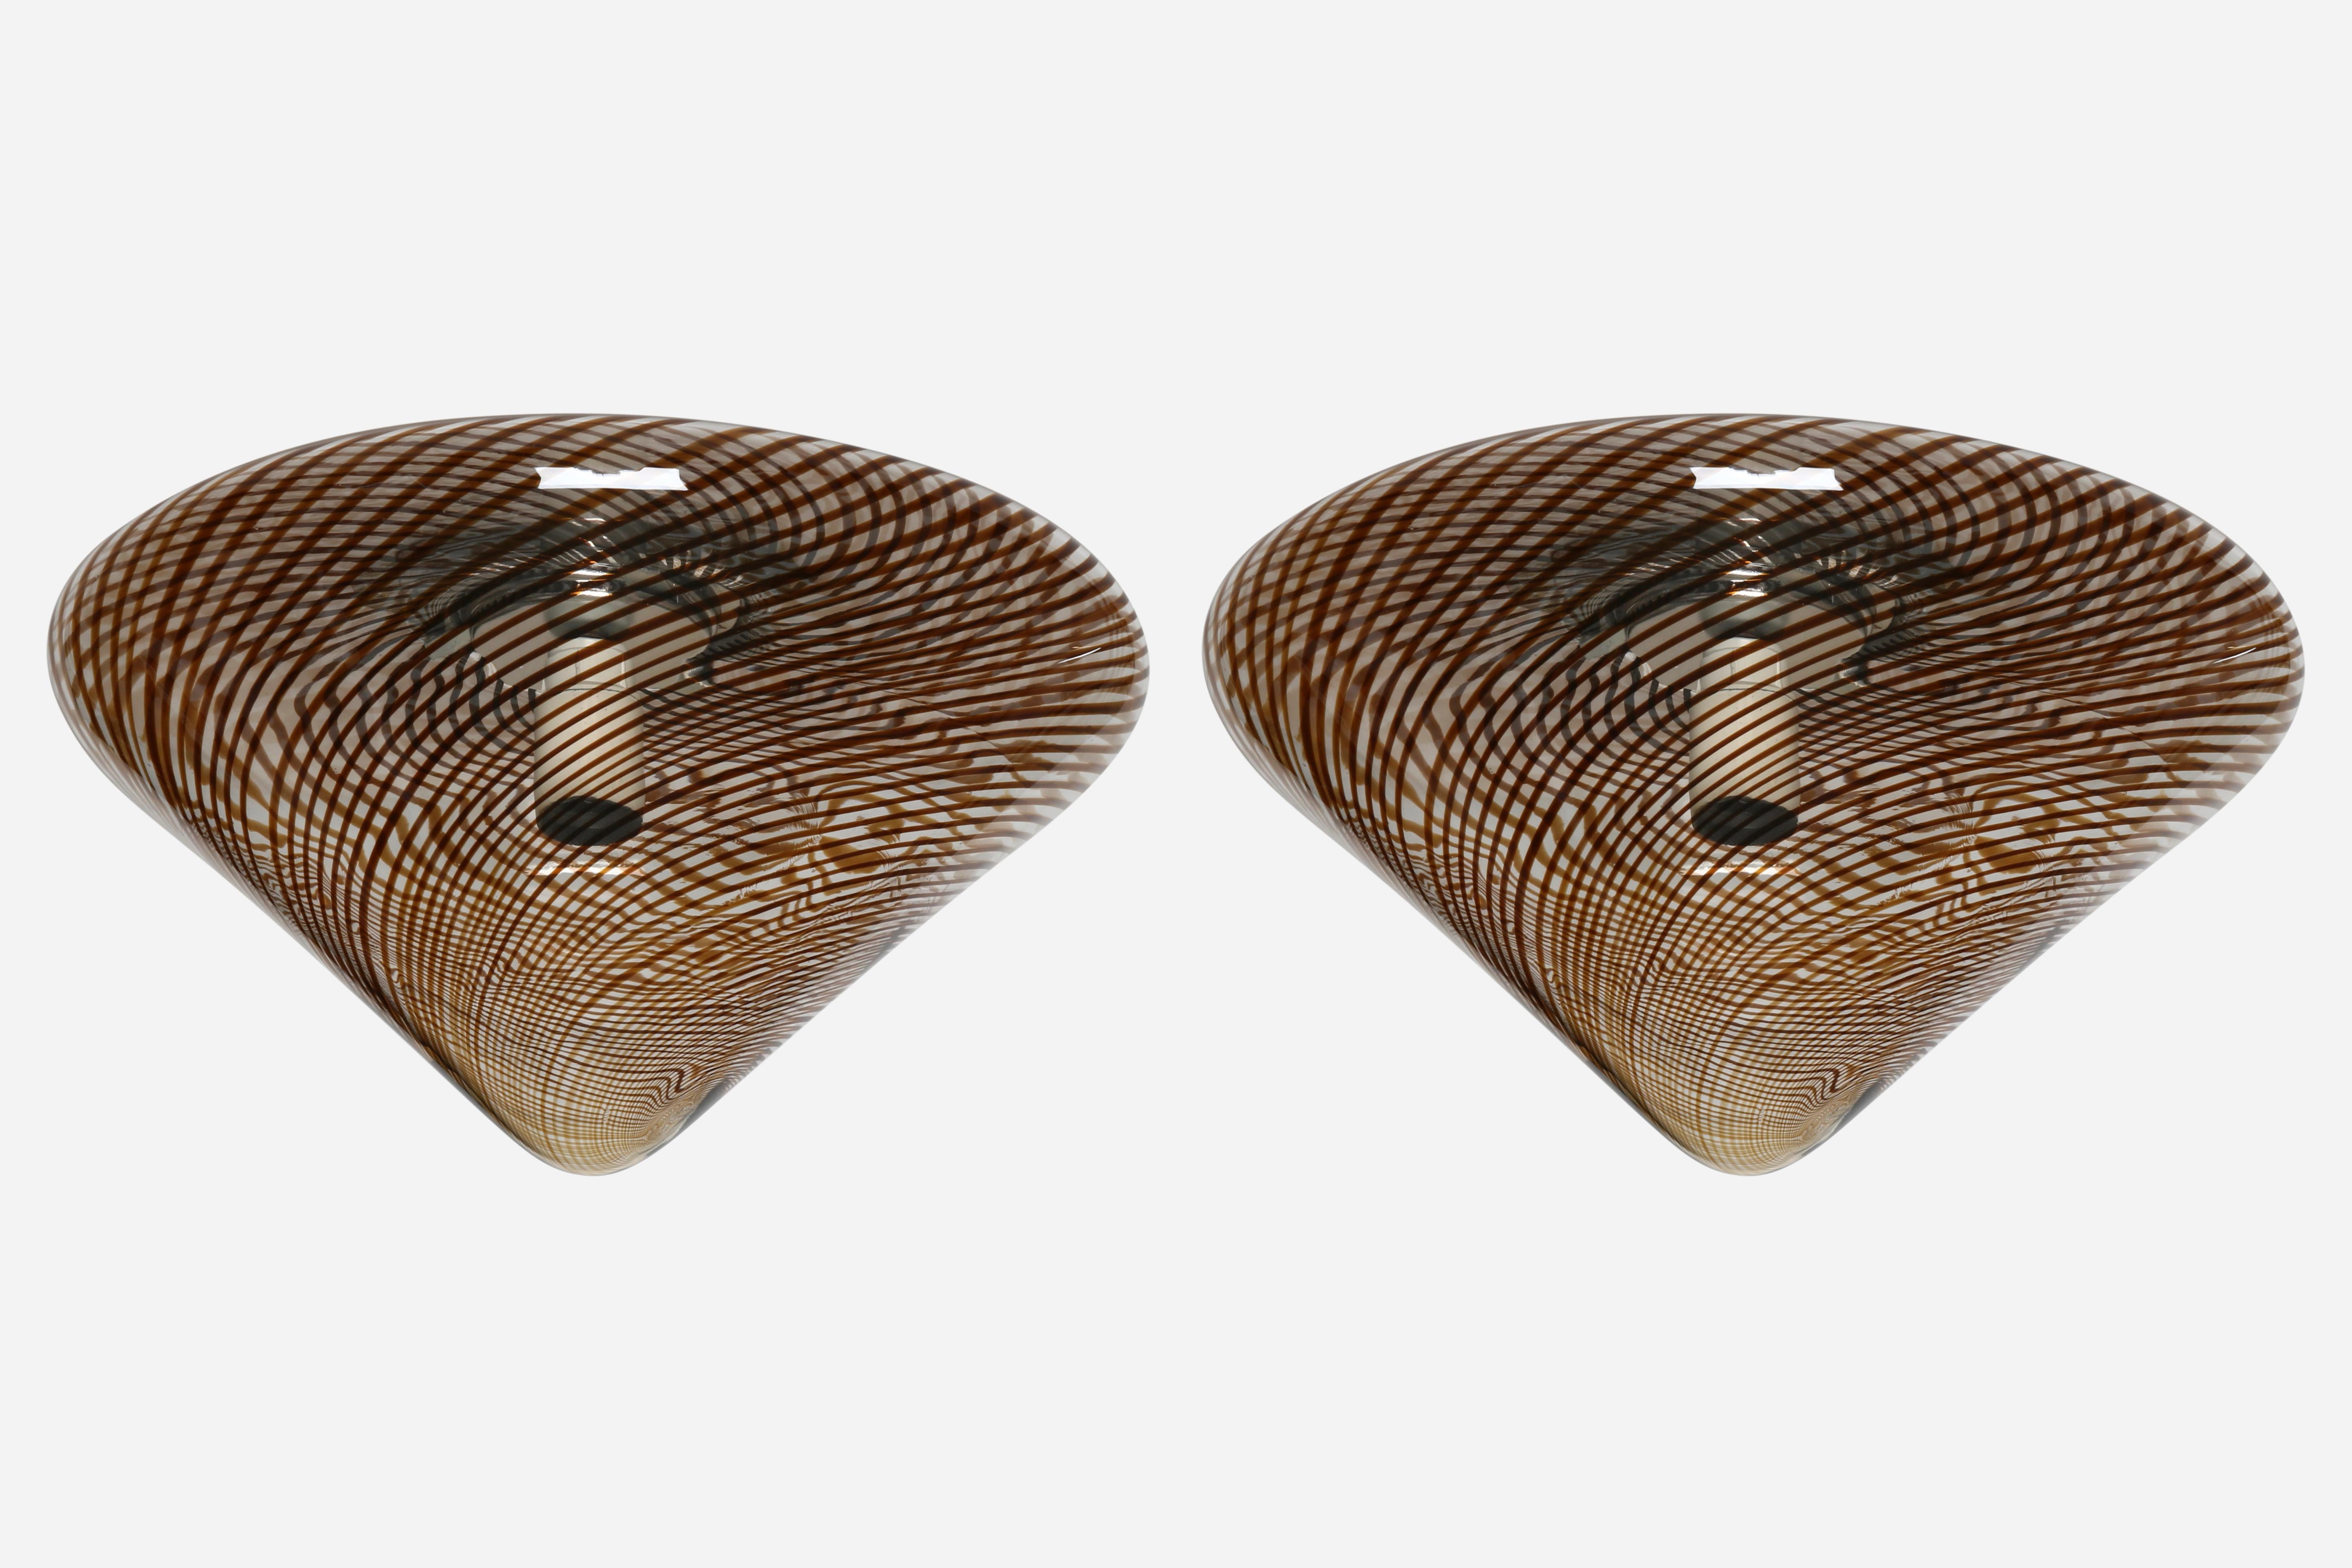 Murano glass ceiling flush mounts, a pair.
Italy 1960s
Hand blown glass, metal.
